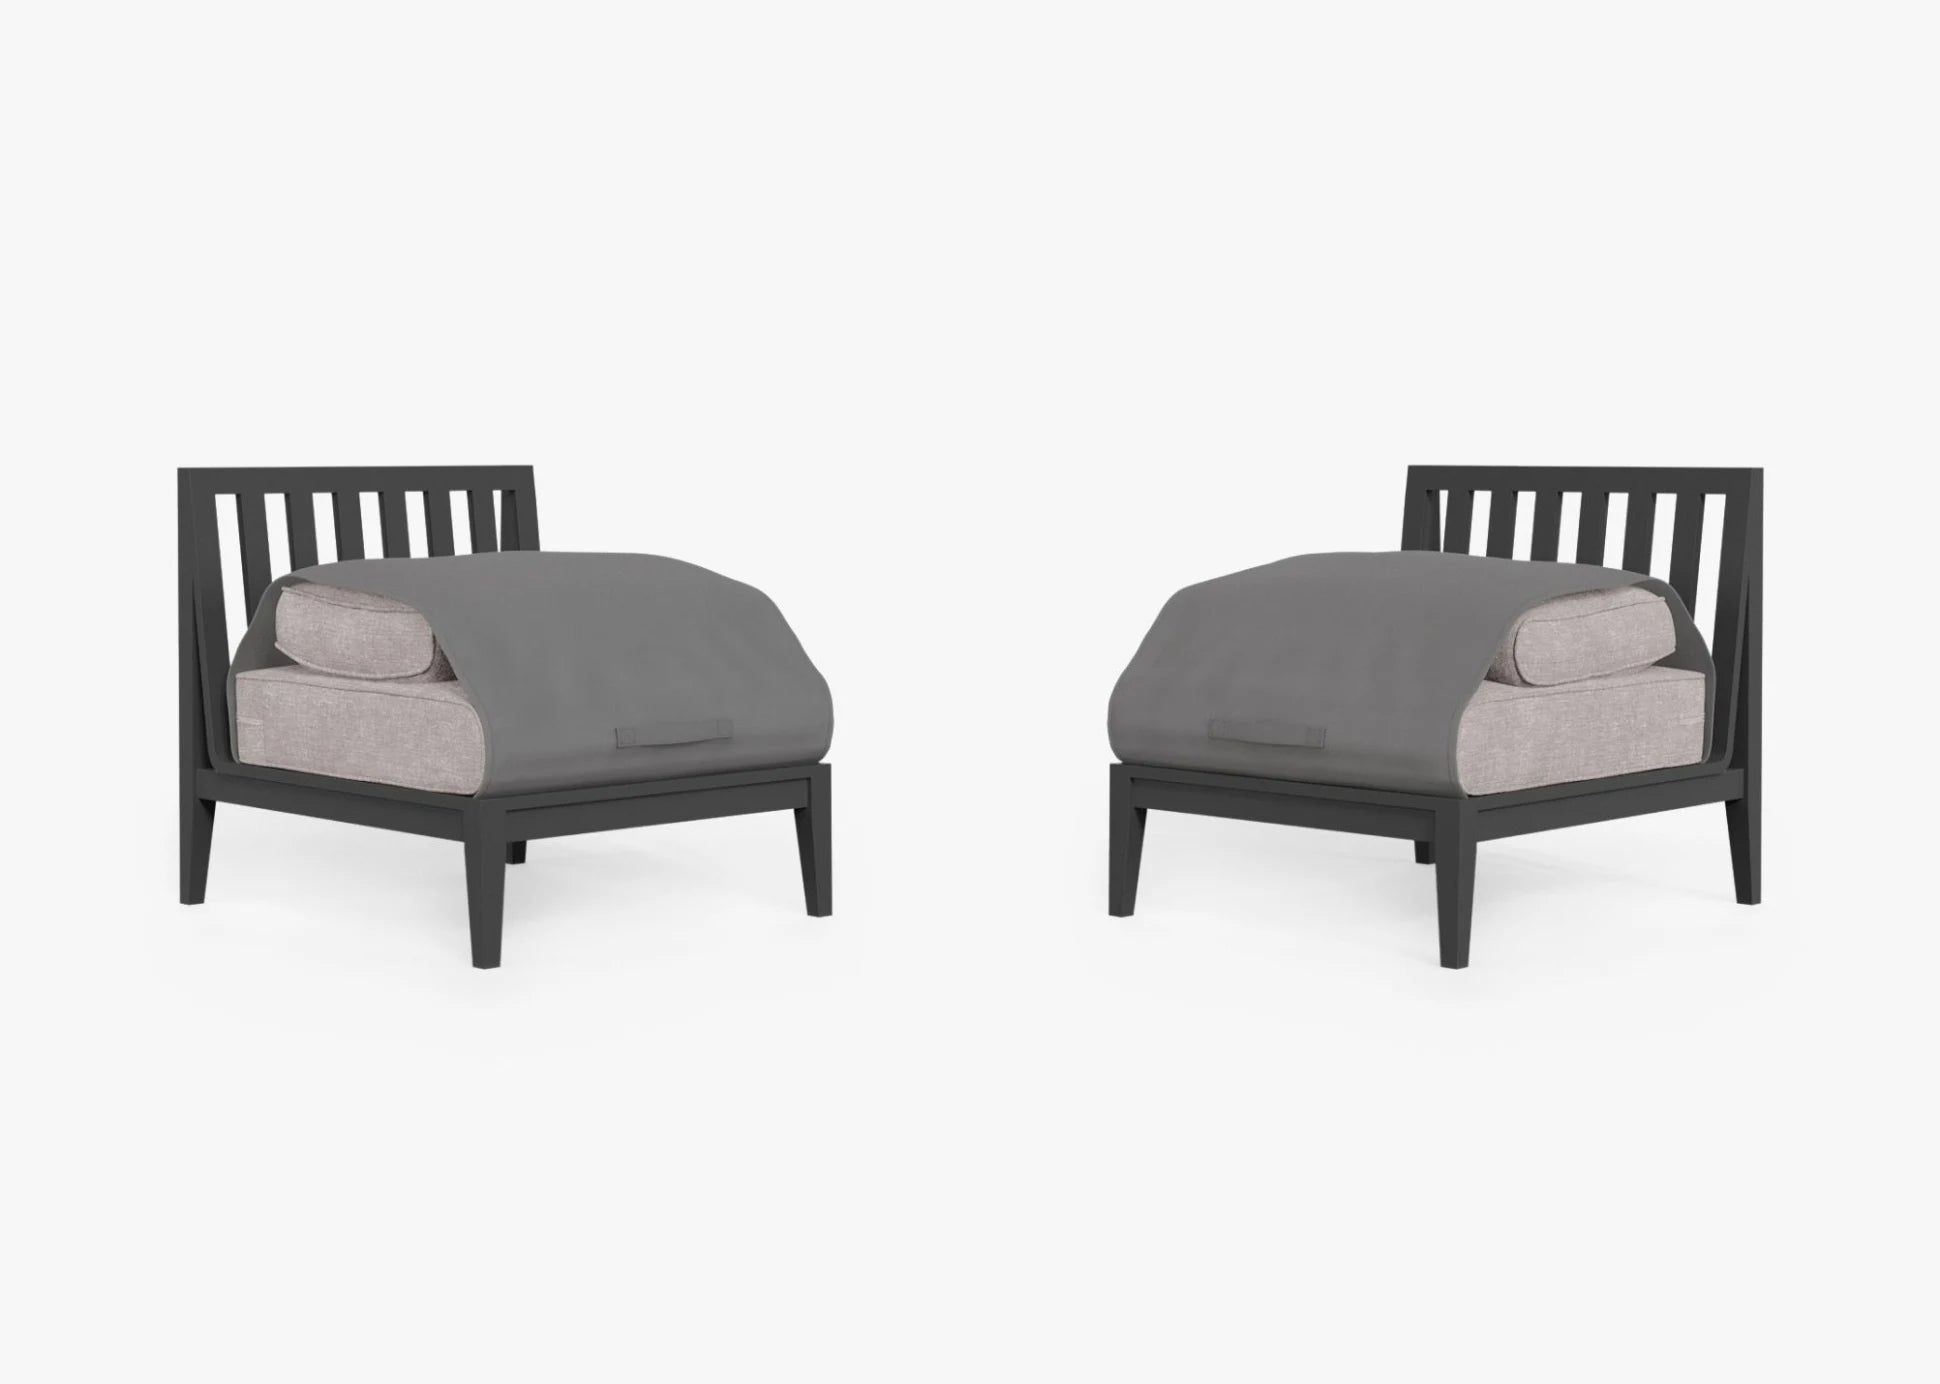 Live Outer 29" Charcoal Aluminum Outdoor Armless Chair Conversation Set With Sandstone Gray Cushion